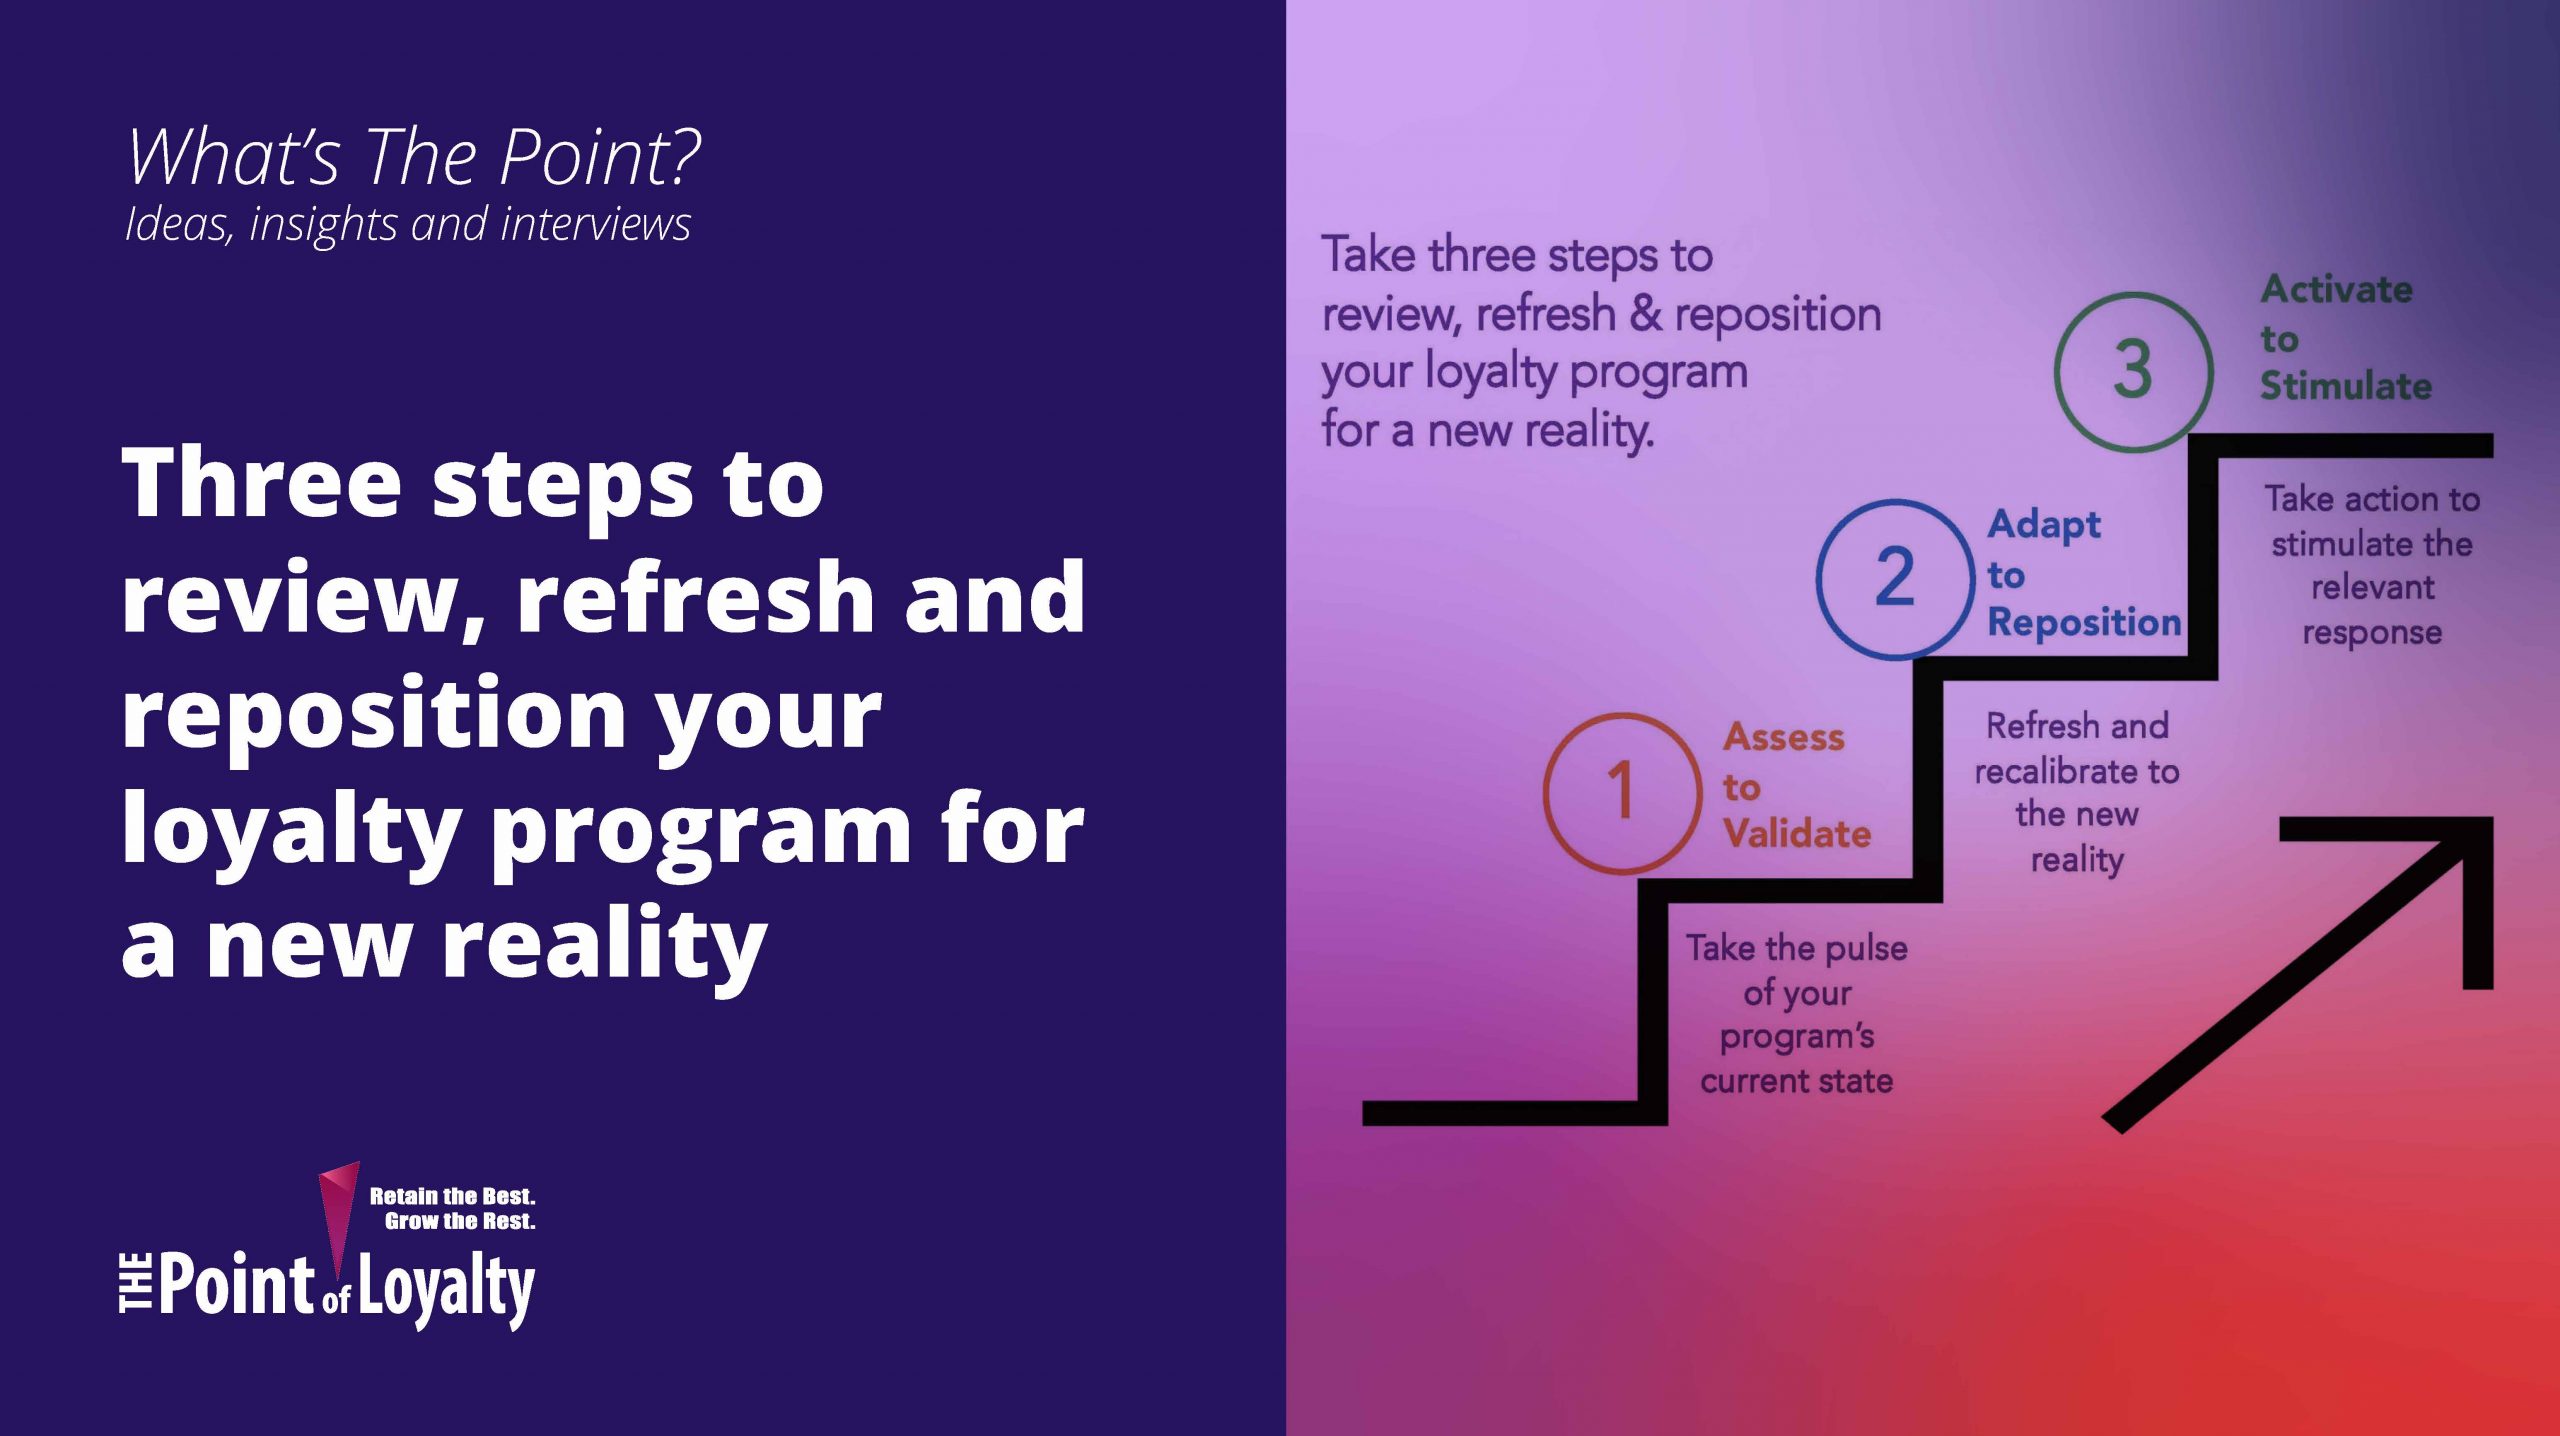 Three steps to review, refresh and reposition your loyalty program for a new reality